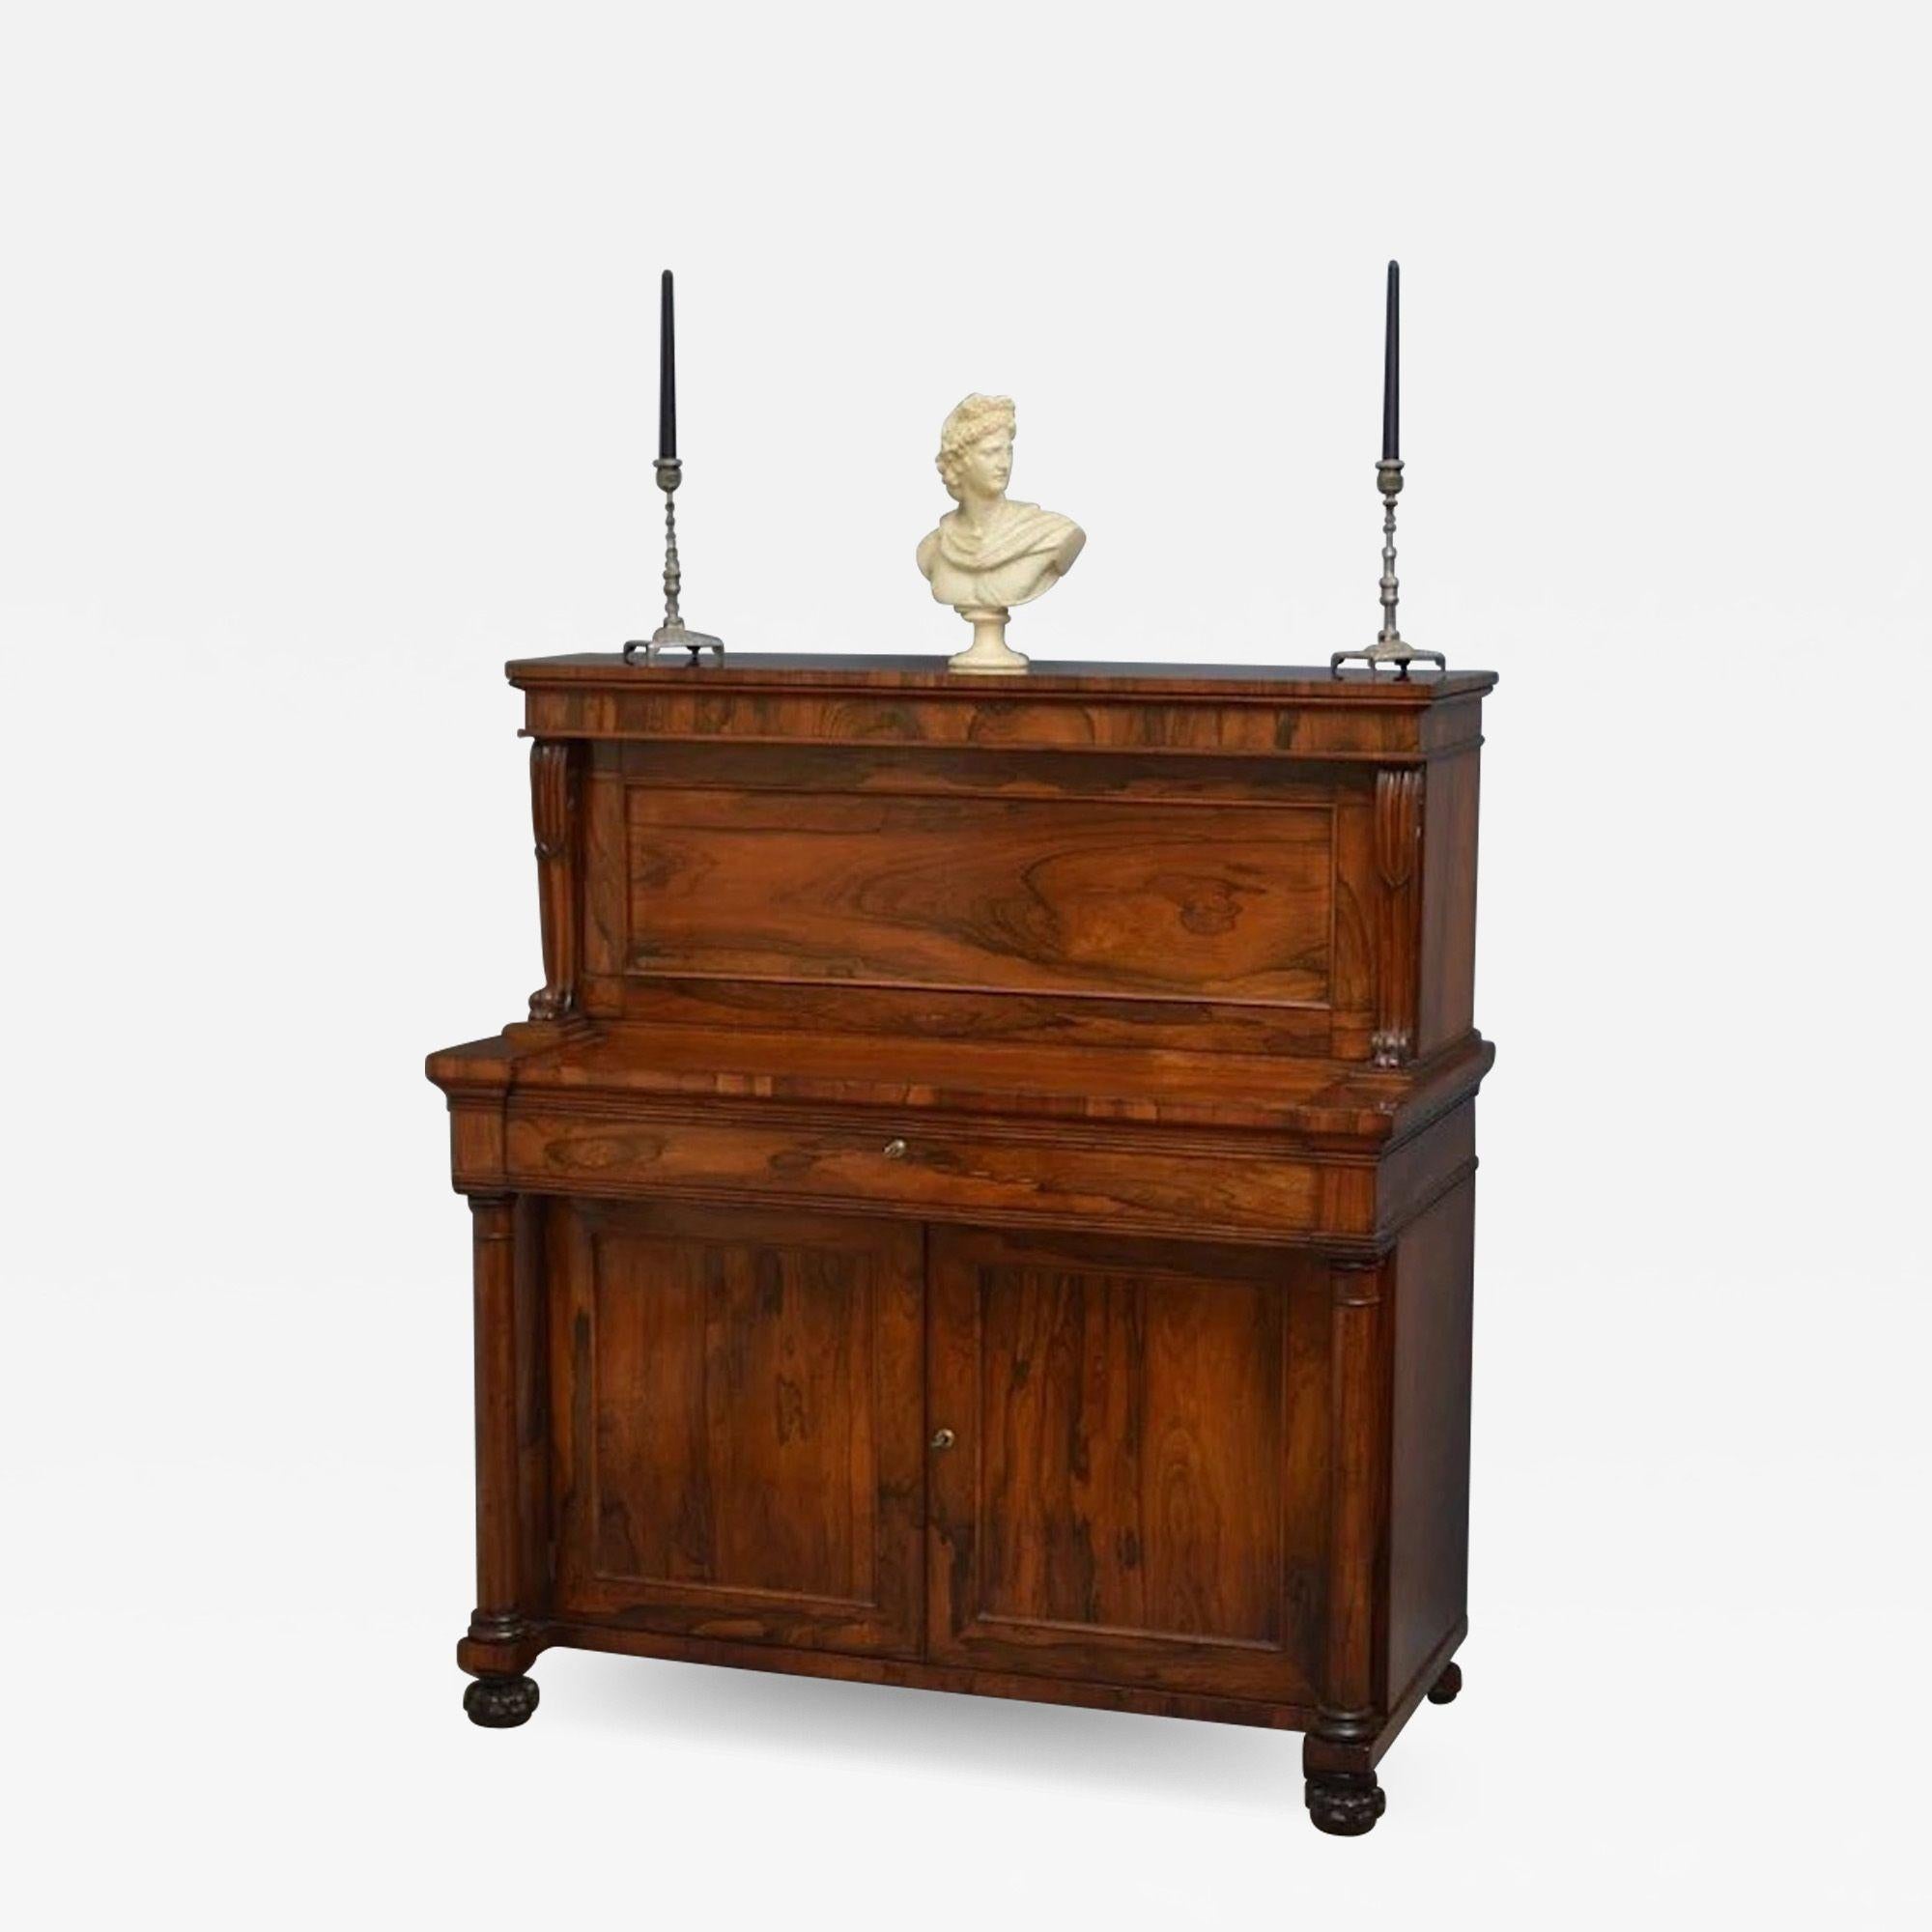 Sn3969 A superb quality and truly impressive, William IV rosewood metamorphic writing desk, having vertical front panel with up and over action revealing a fitted interior of drawers and pigeon holes, pull-out writing slides operate covered panel,